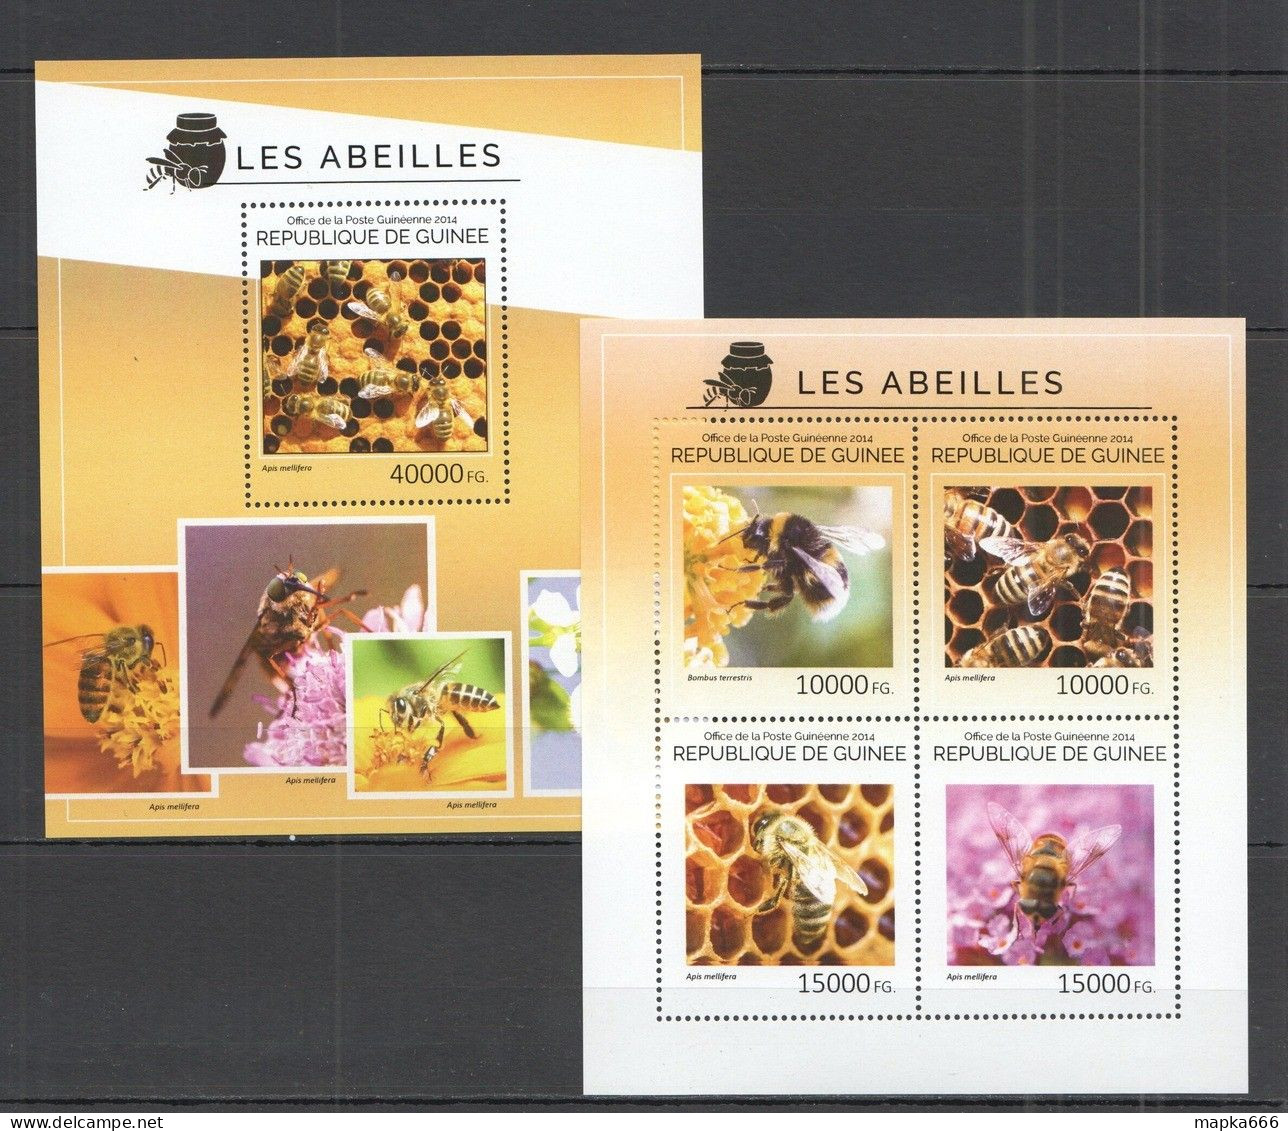 St717 2014 Guinea Fauna Insects Honey Bees Abeilles Kb+Bl Mnh Stamps - Honeybees